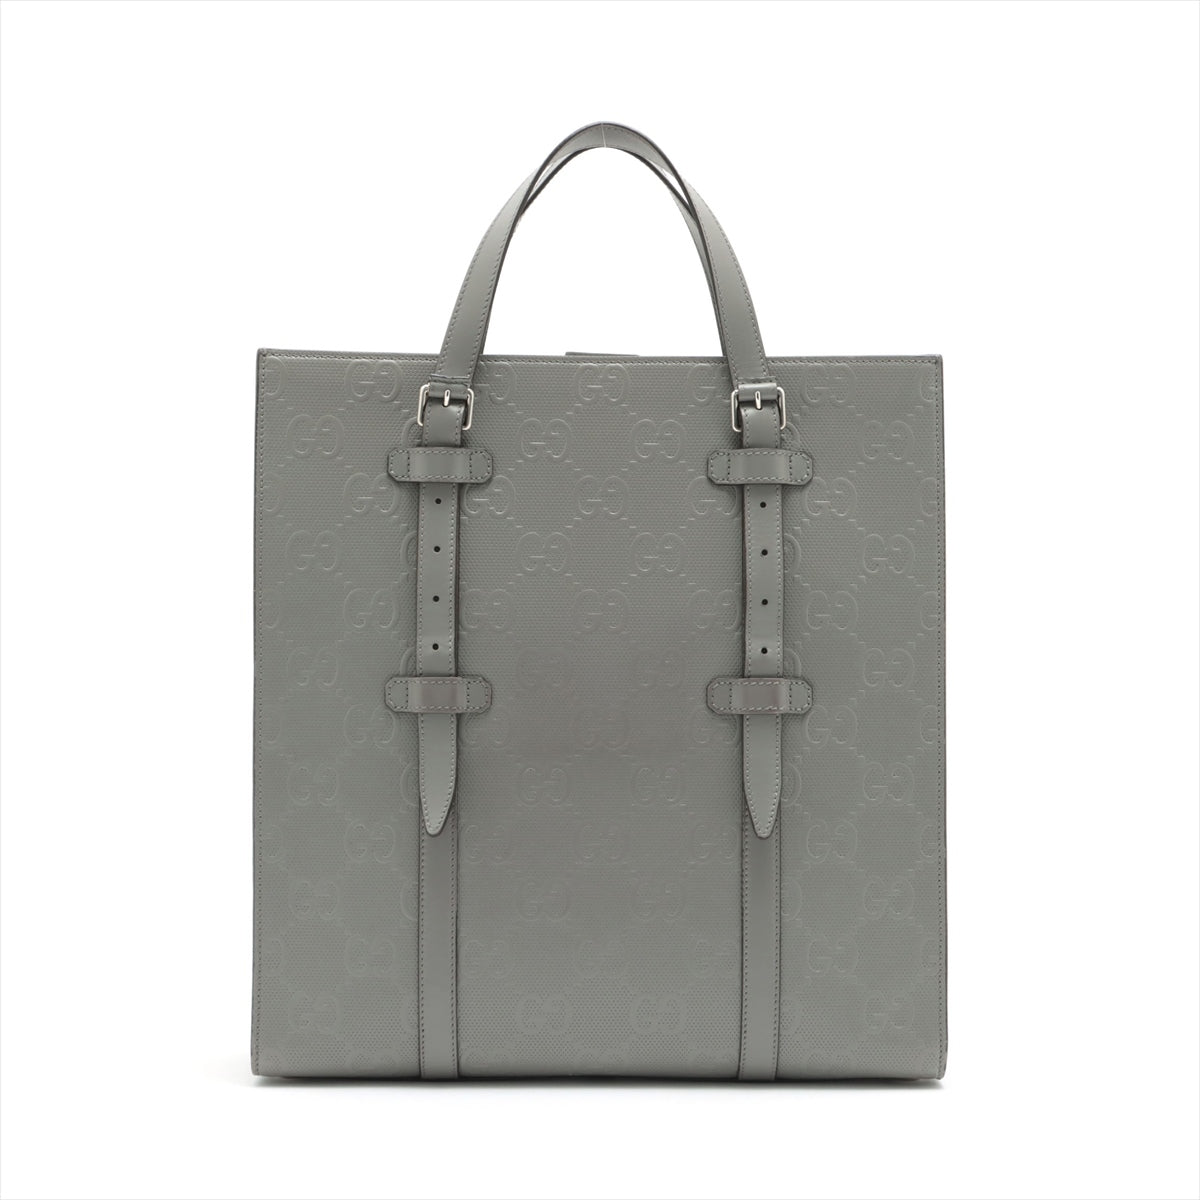 Gucci GG embossed Leather Tote Bag Grey 700421